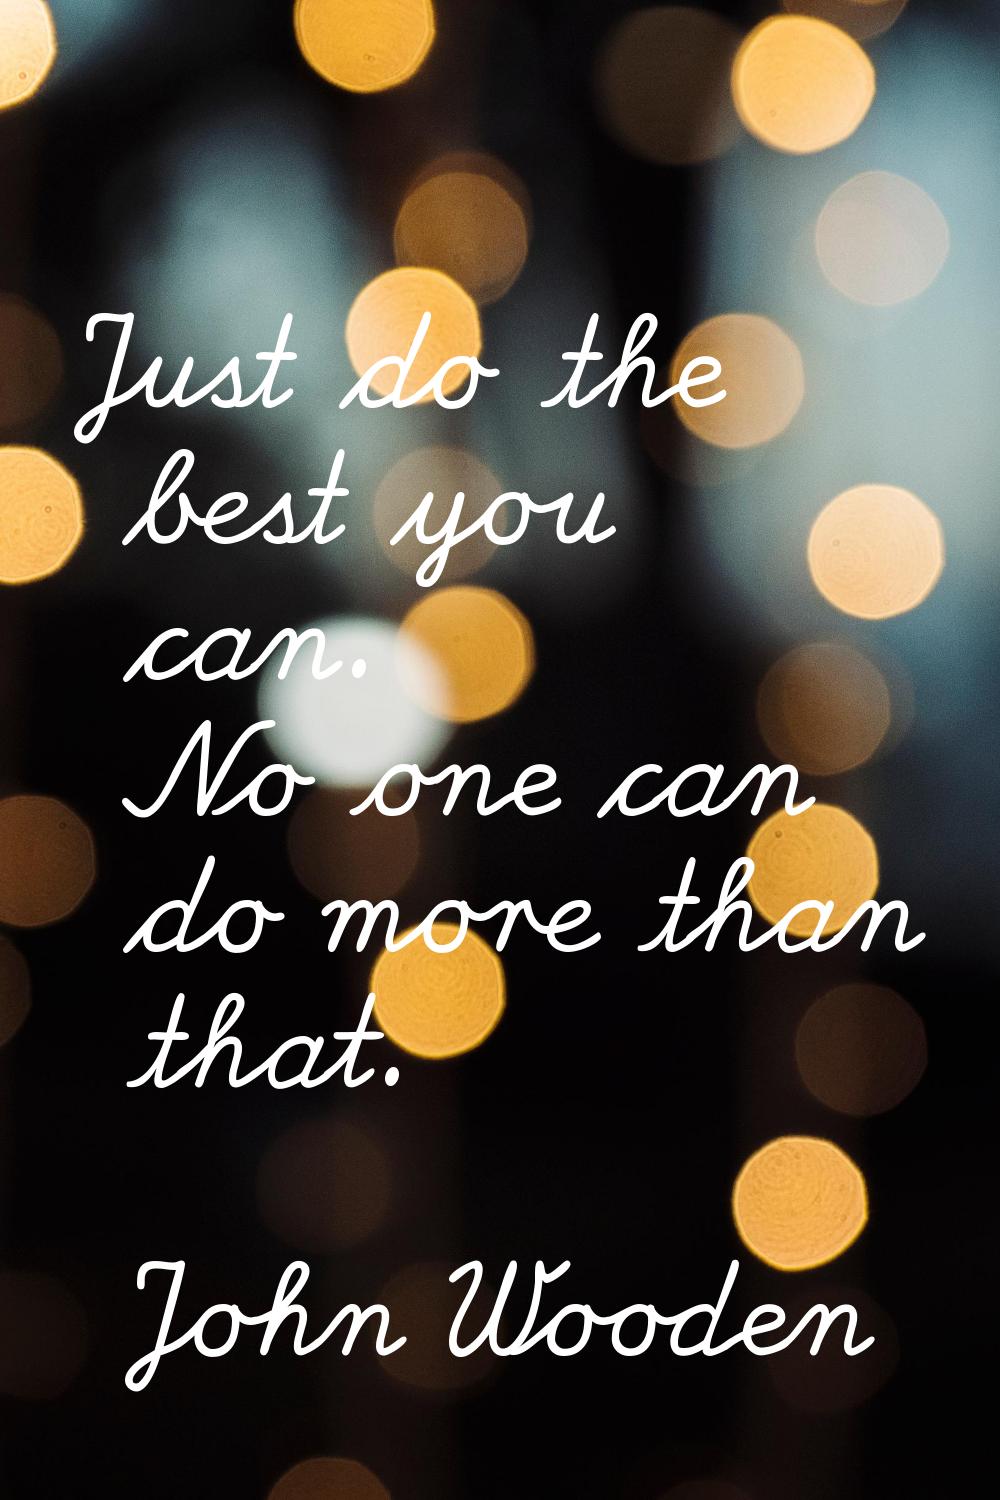 Just do the best you can. No one can do more than that.